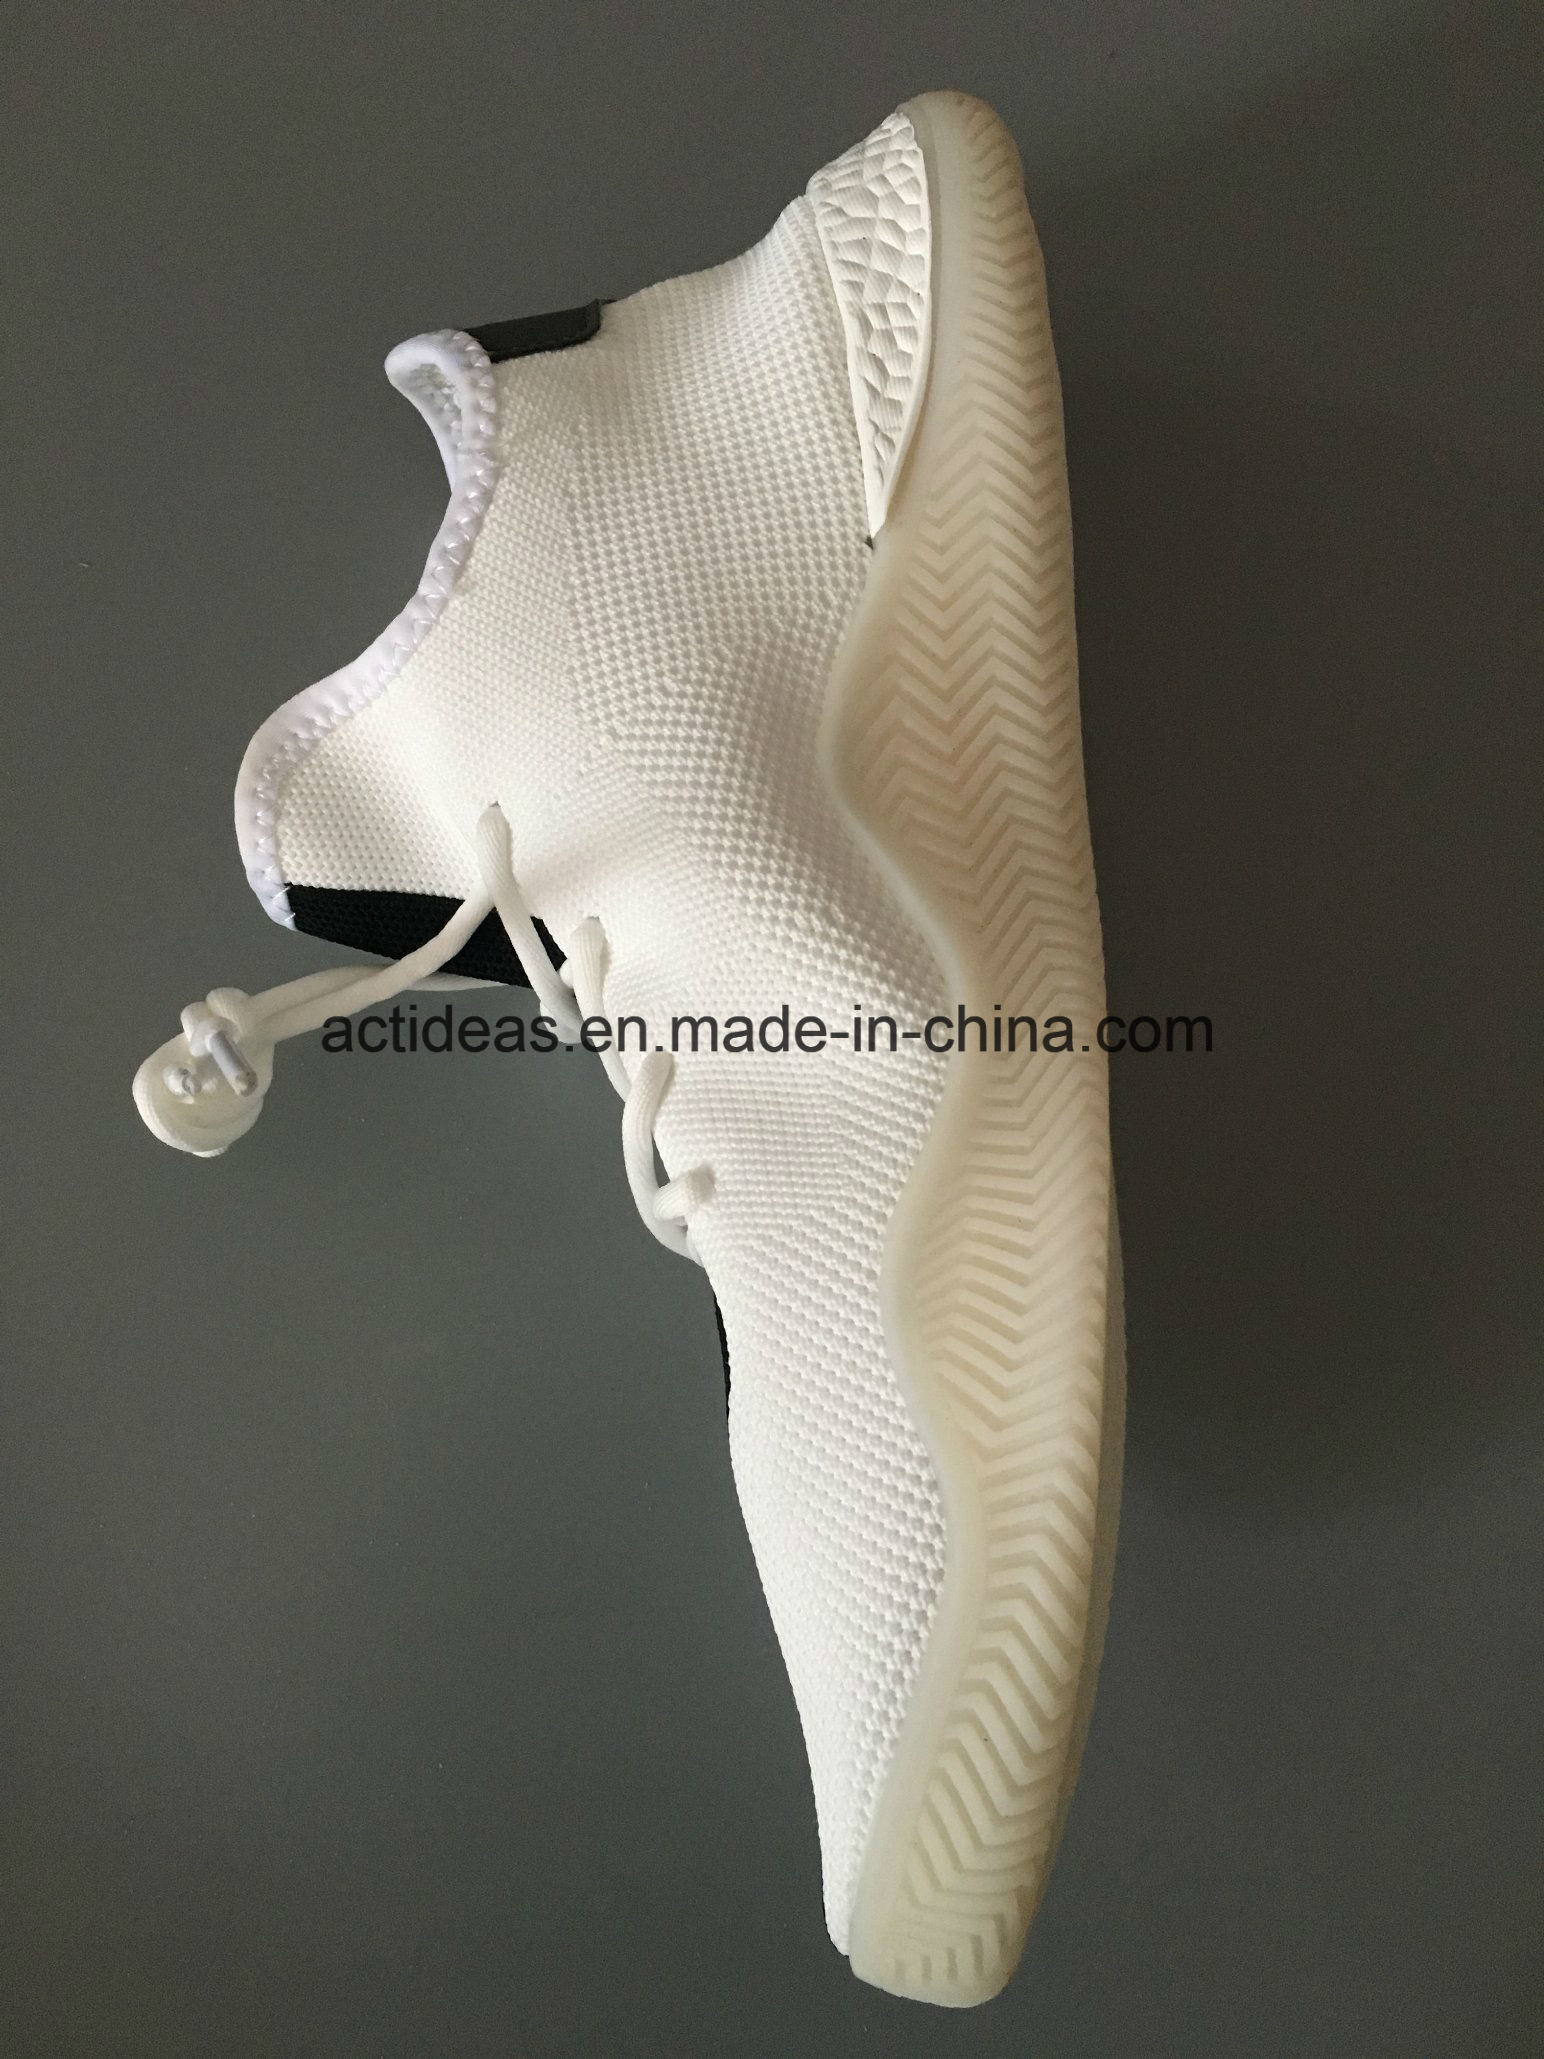 China Factory New Design Men Sneakers Cheap Fashion Sport Shoes